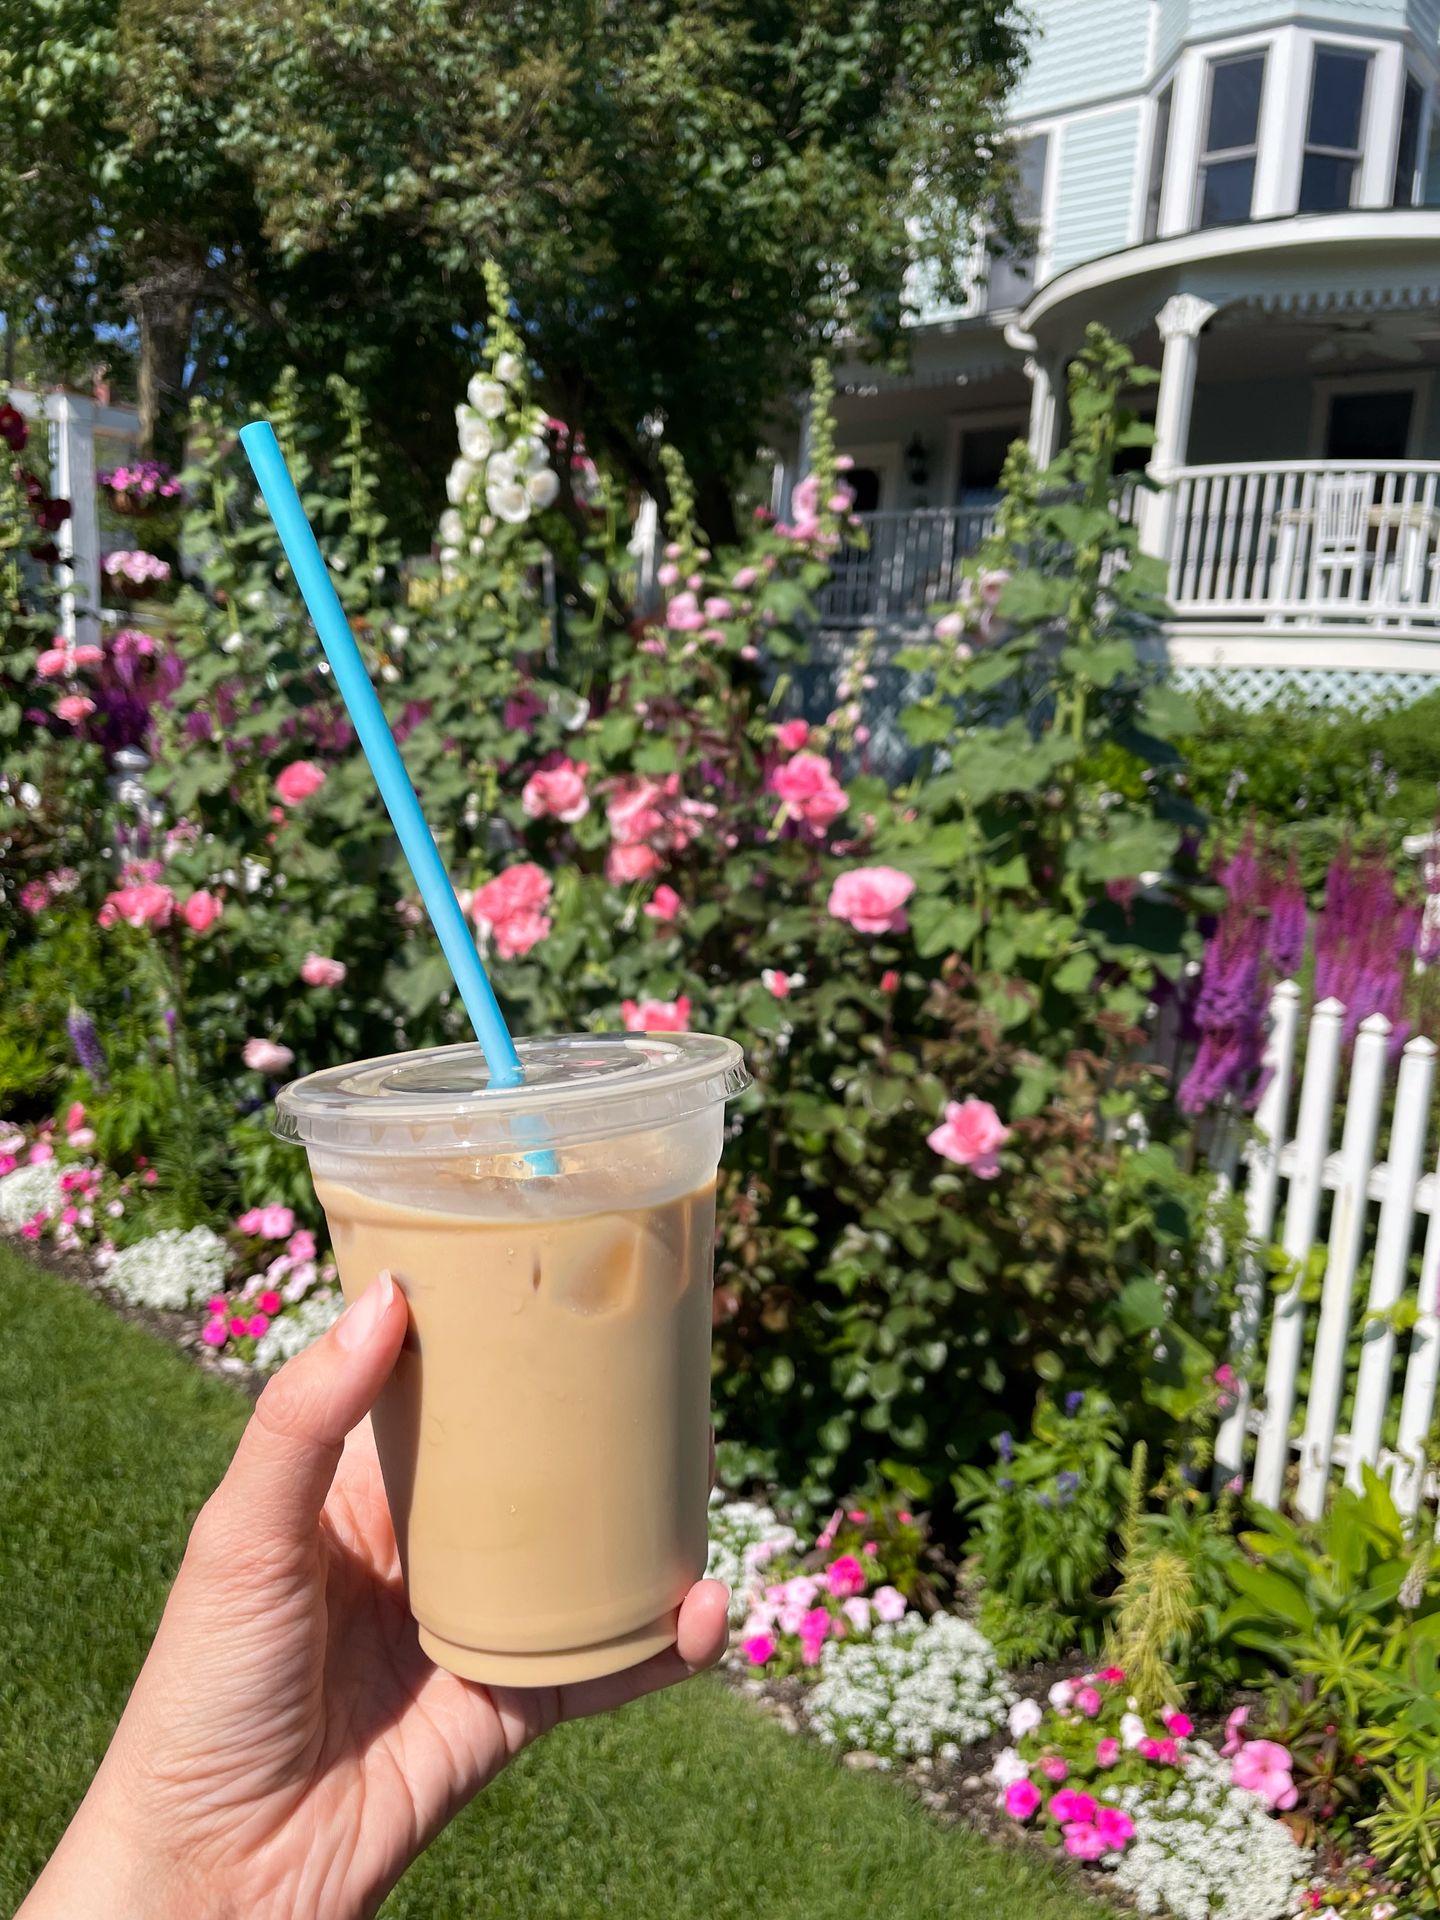 Holding up an iced coffee in front of flowers on Mackinac Island.